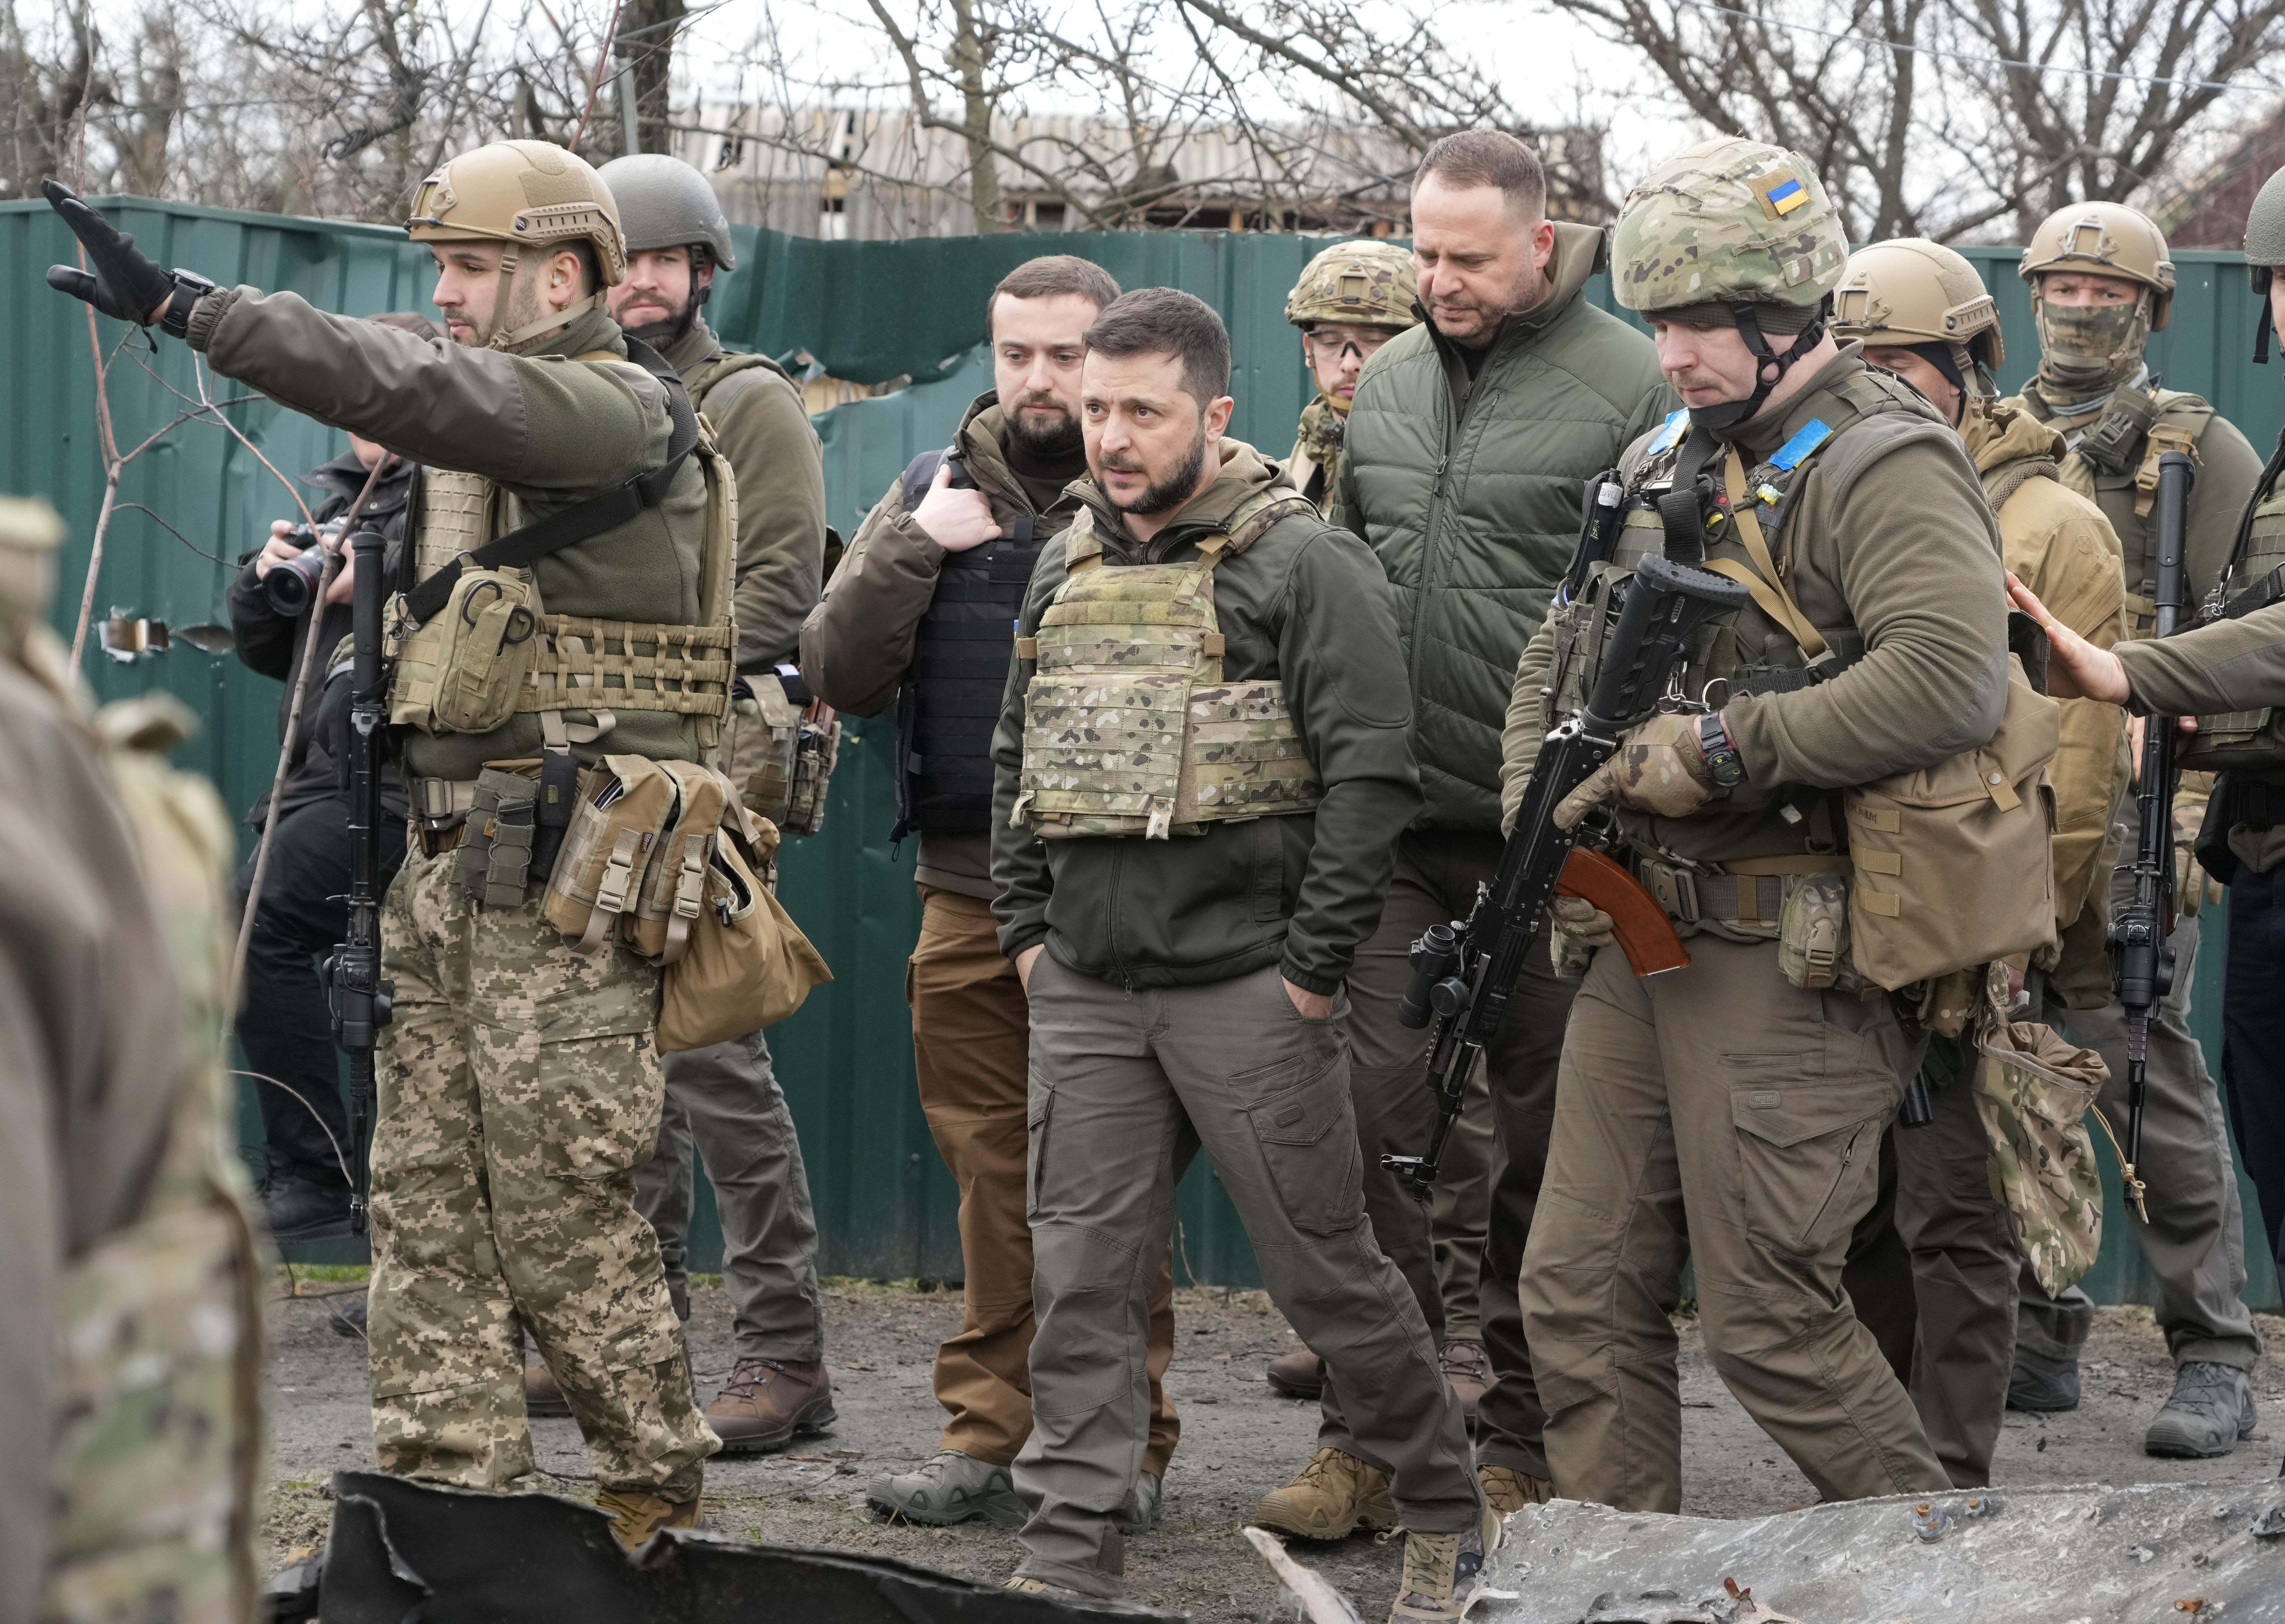 Volodomyr Zelenskyy in fatigues and bullet proof vest visits the town of Bucha accompanied by Ukrainian soldiers.